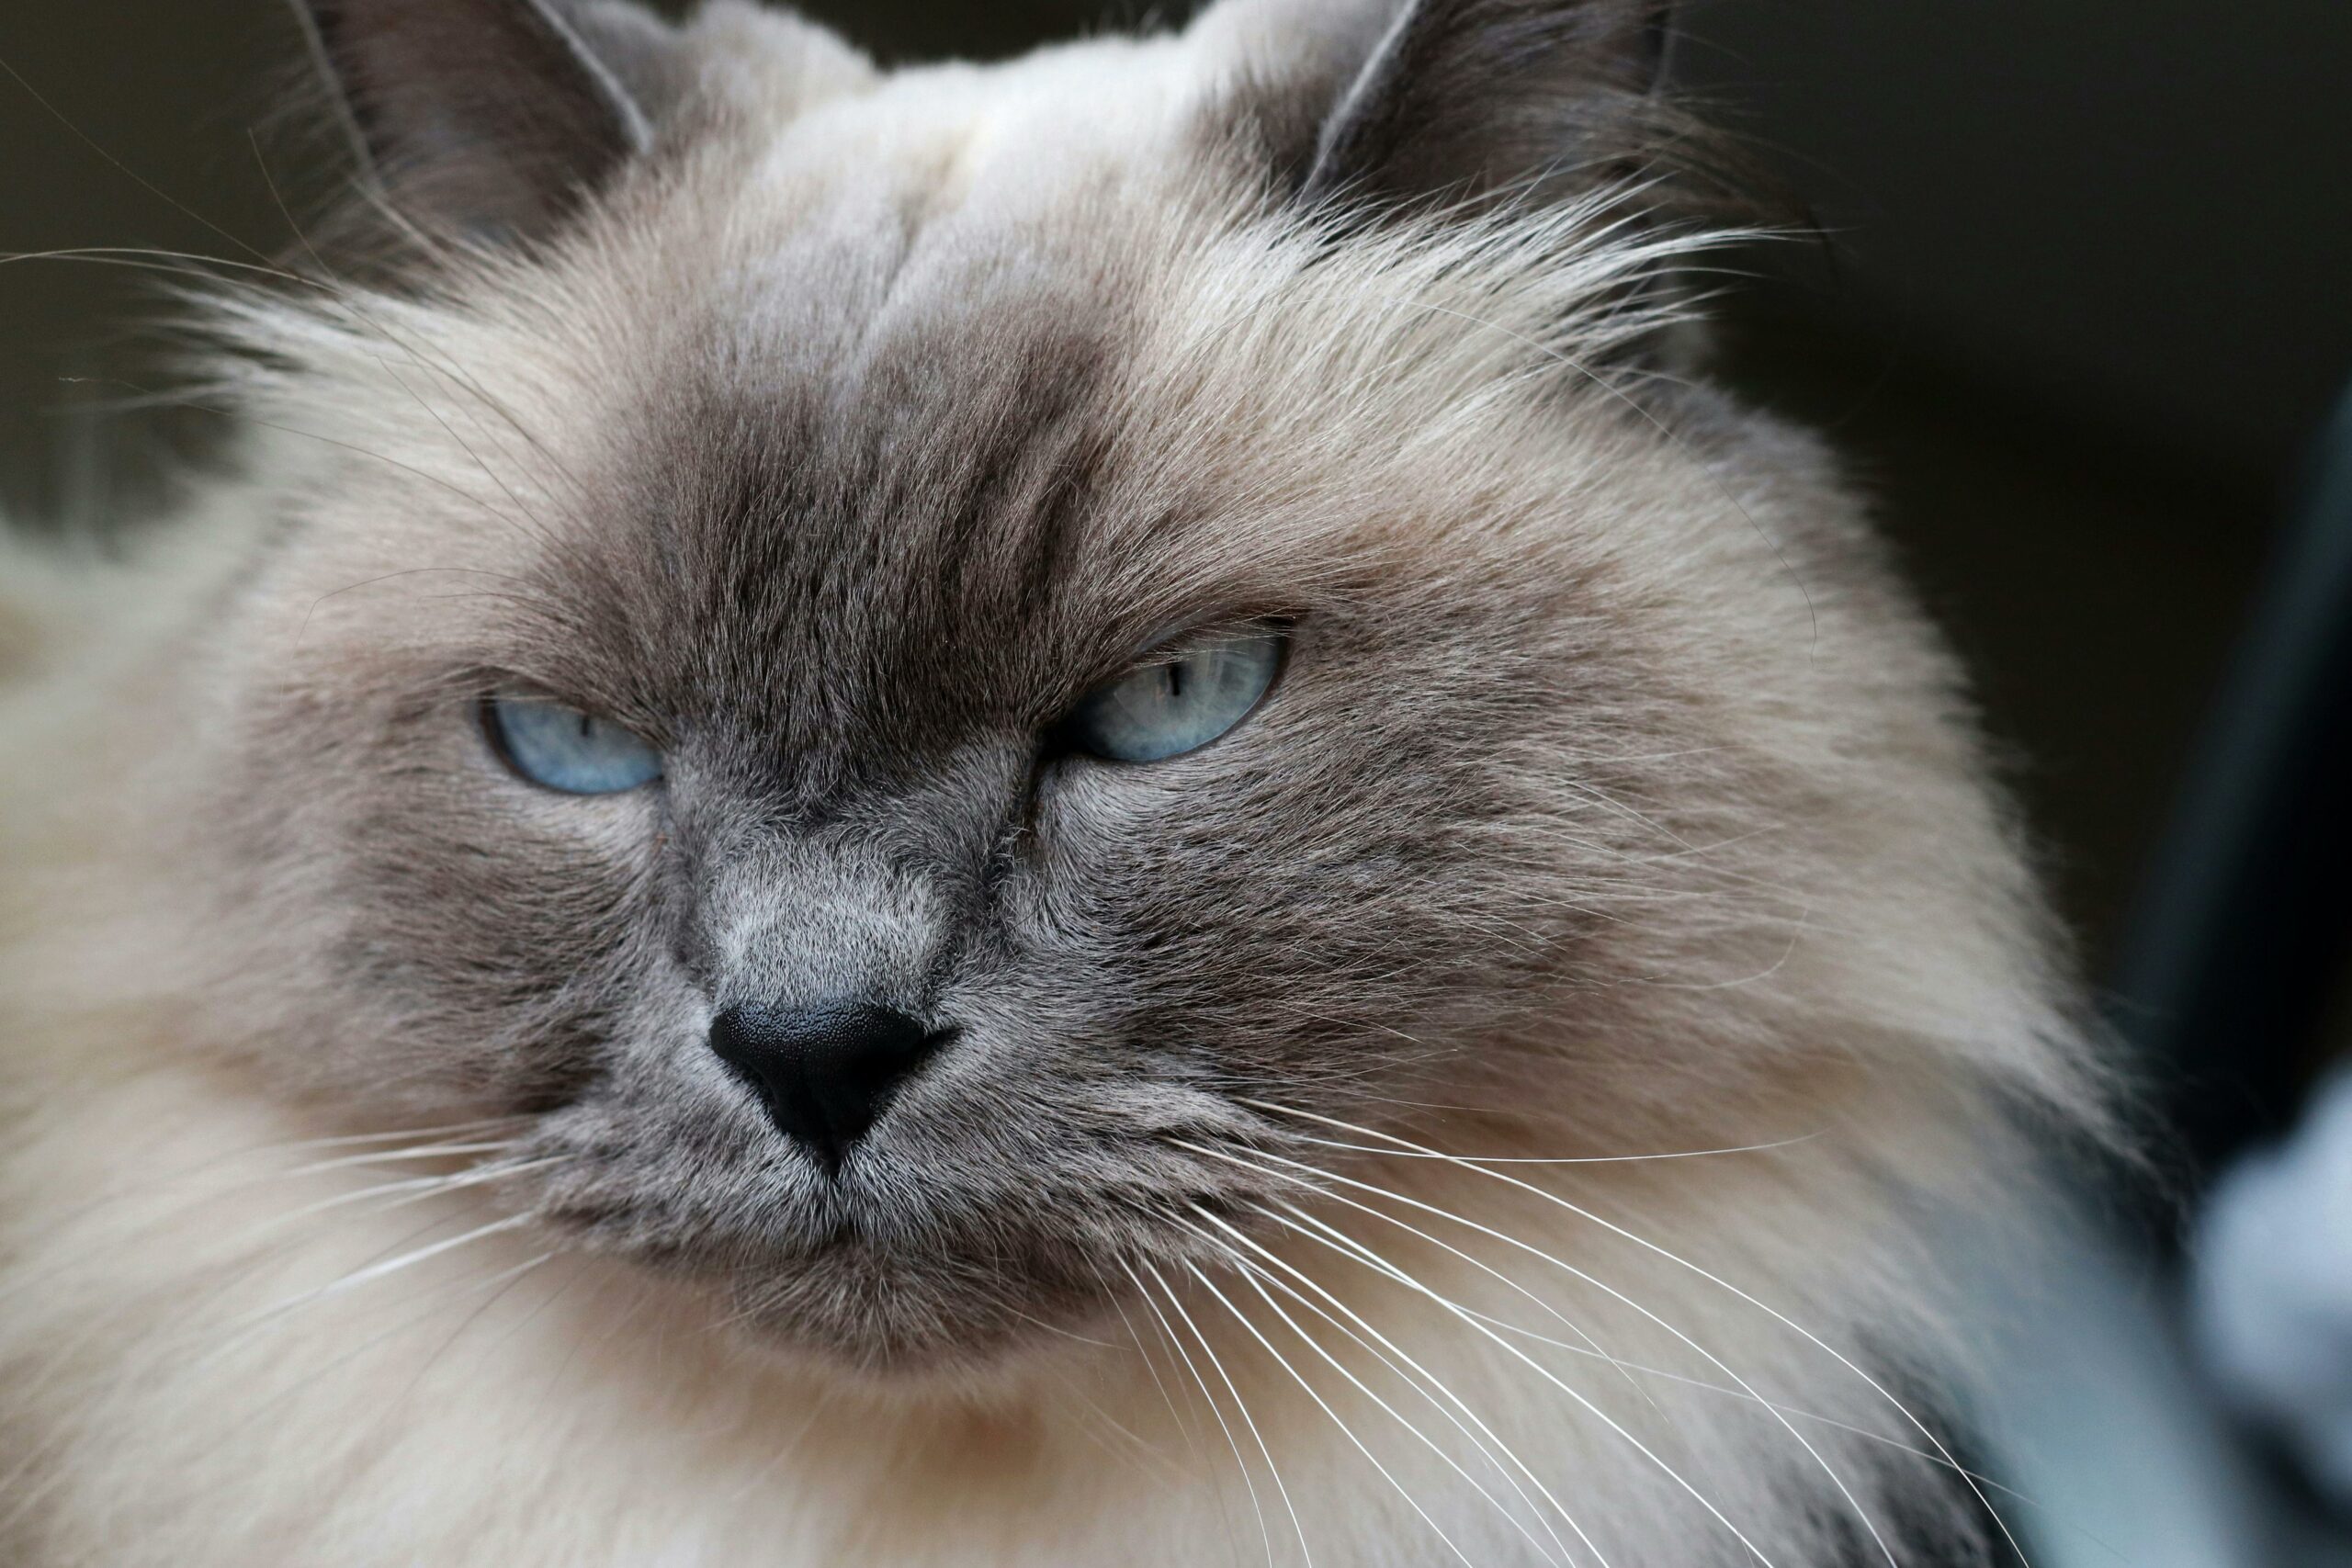 Cat Balinese: The Long-haired Siamese